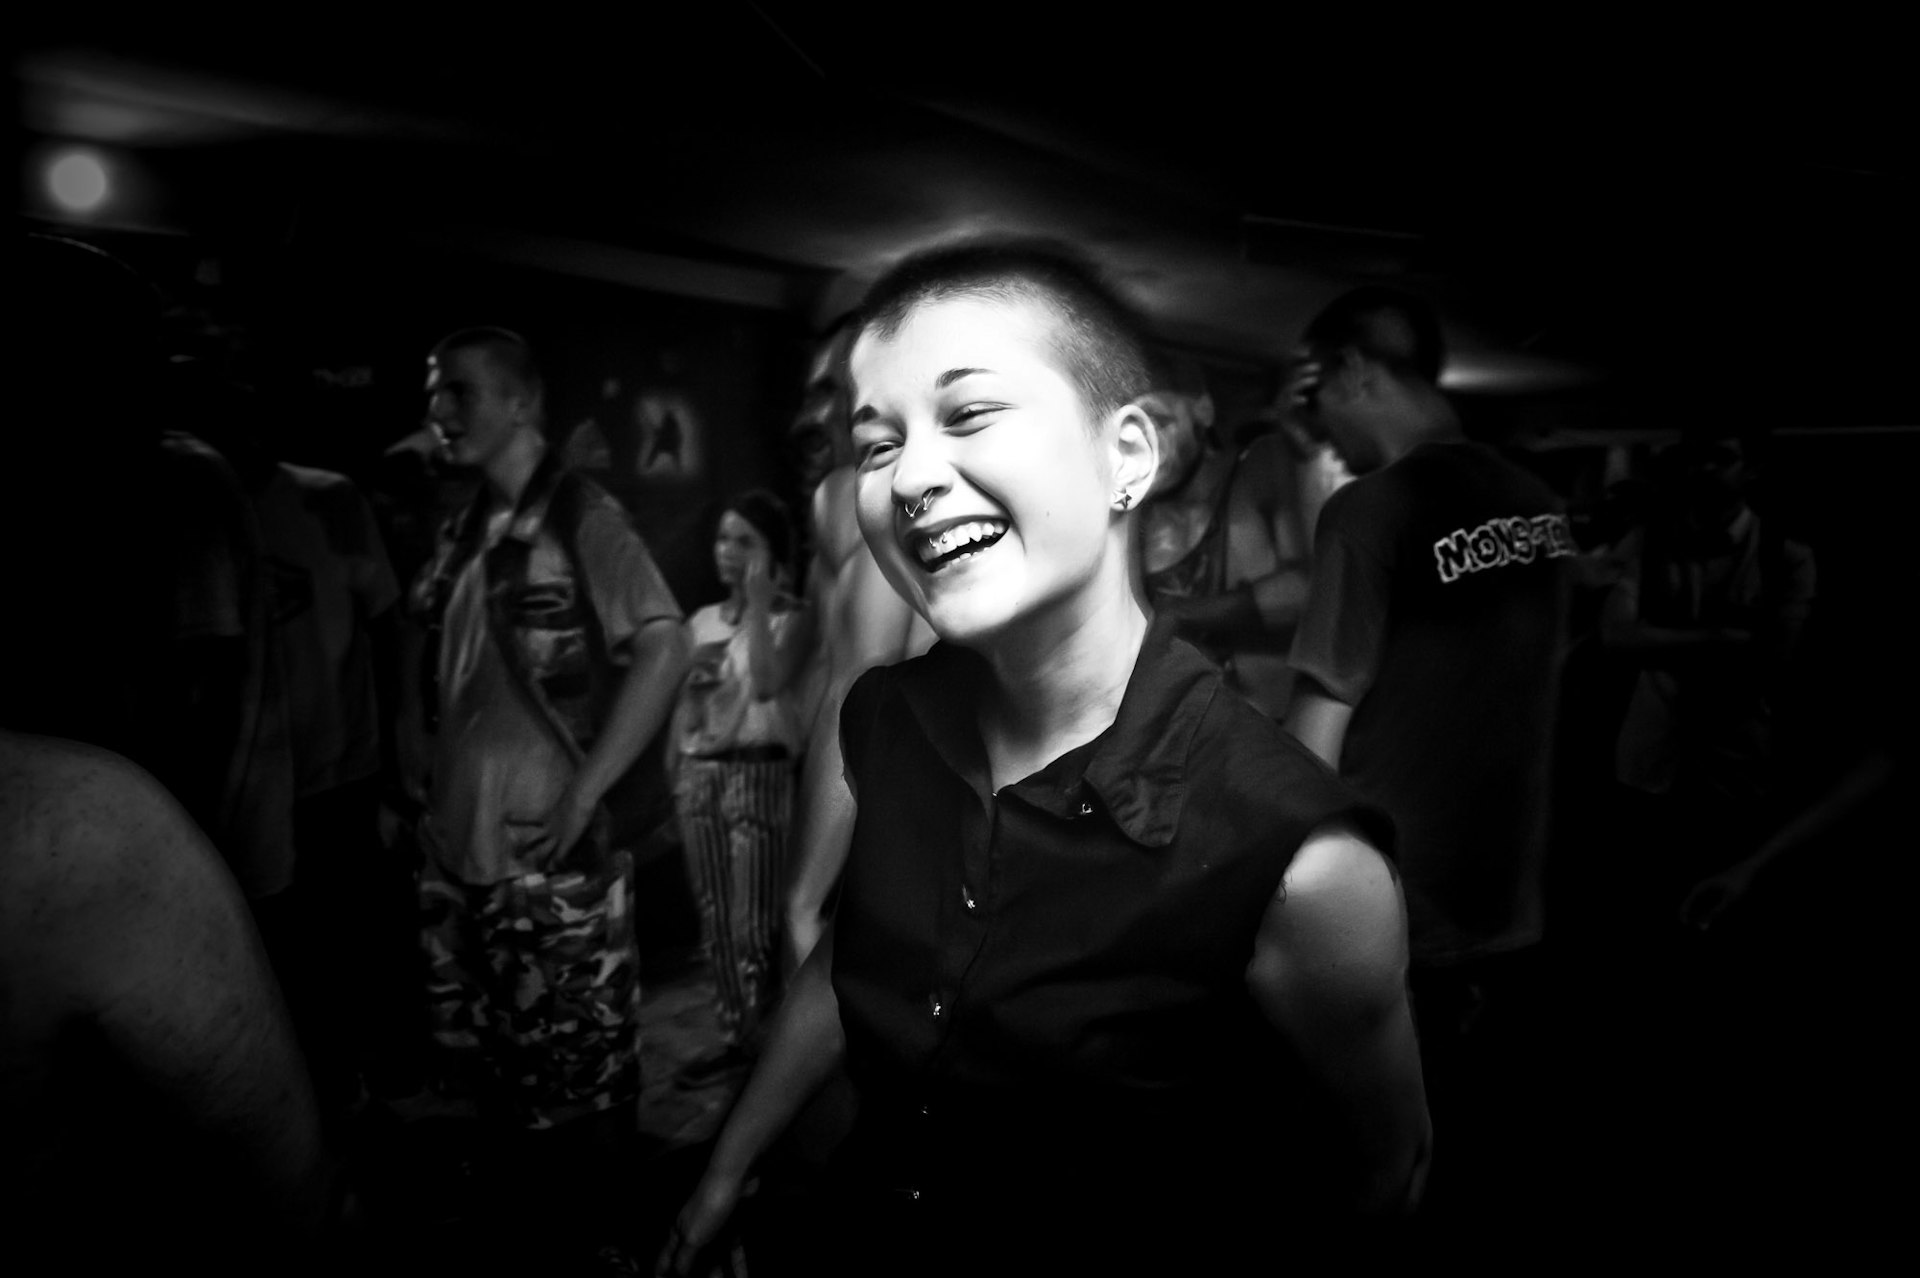 Anika Jorjadze is a 15-year-old Georgian who discovered Punk music last year. “Punk is a culture and I like it,” she says. “There aren’t many people who listen to this music, but I find myself in the lyrics of punk rock songs. It has energy, rhythm...”